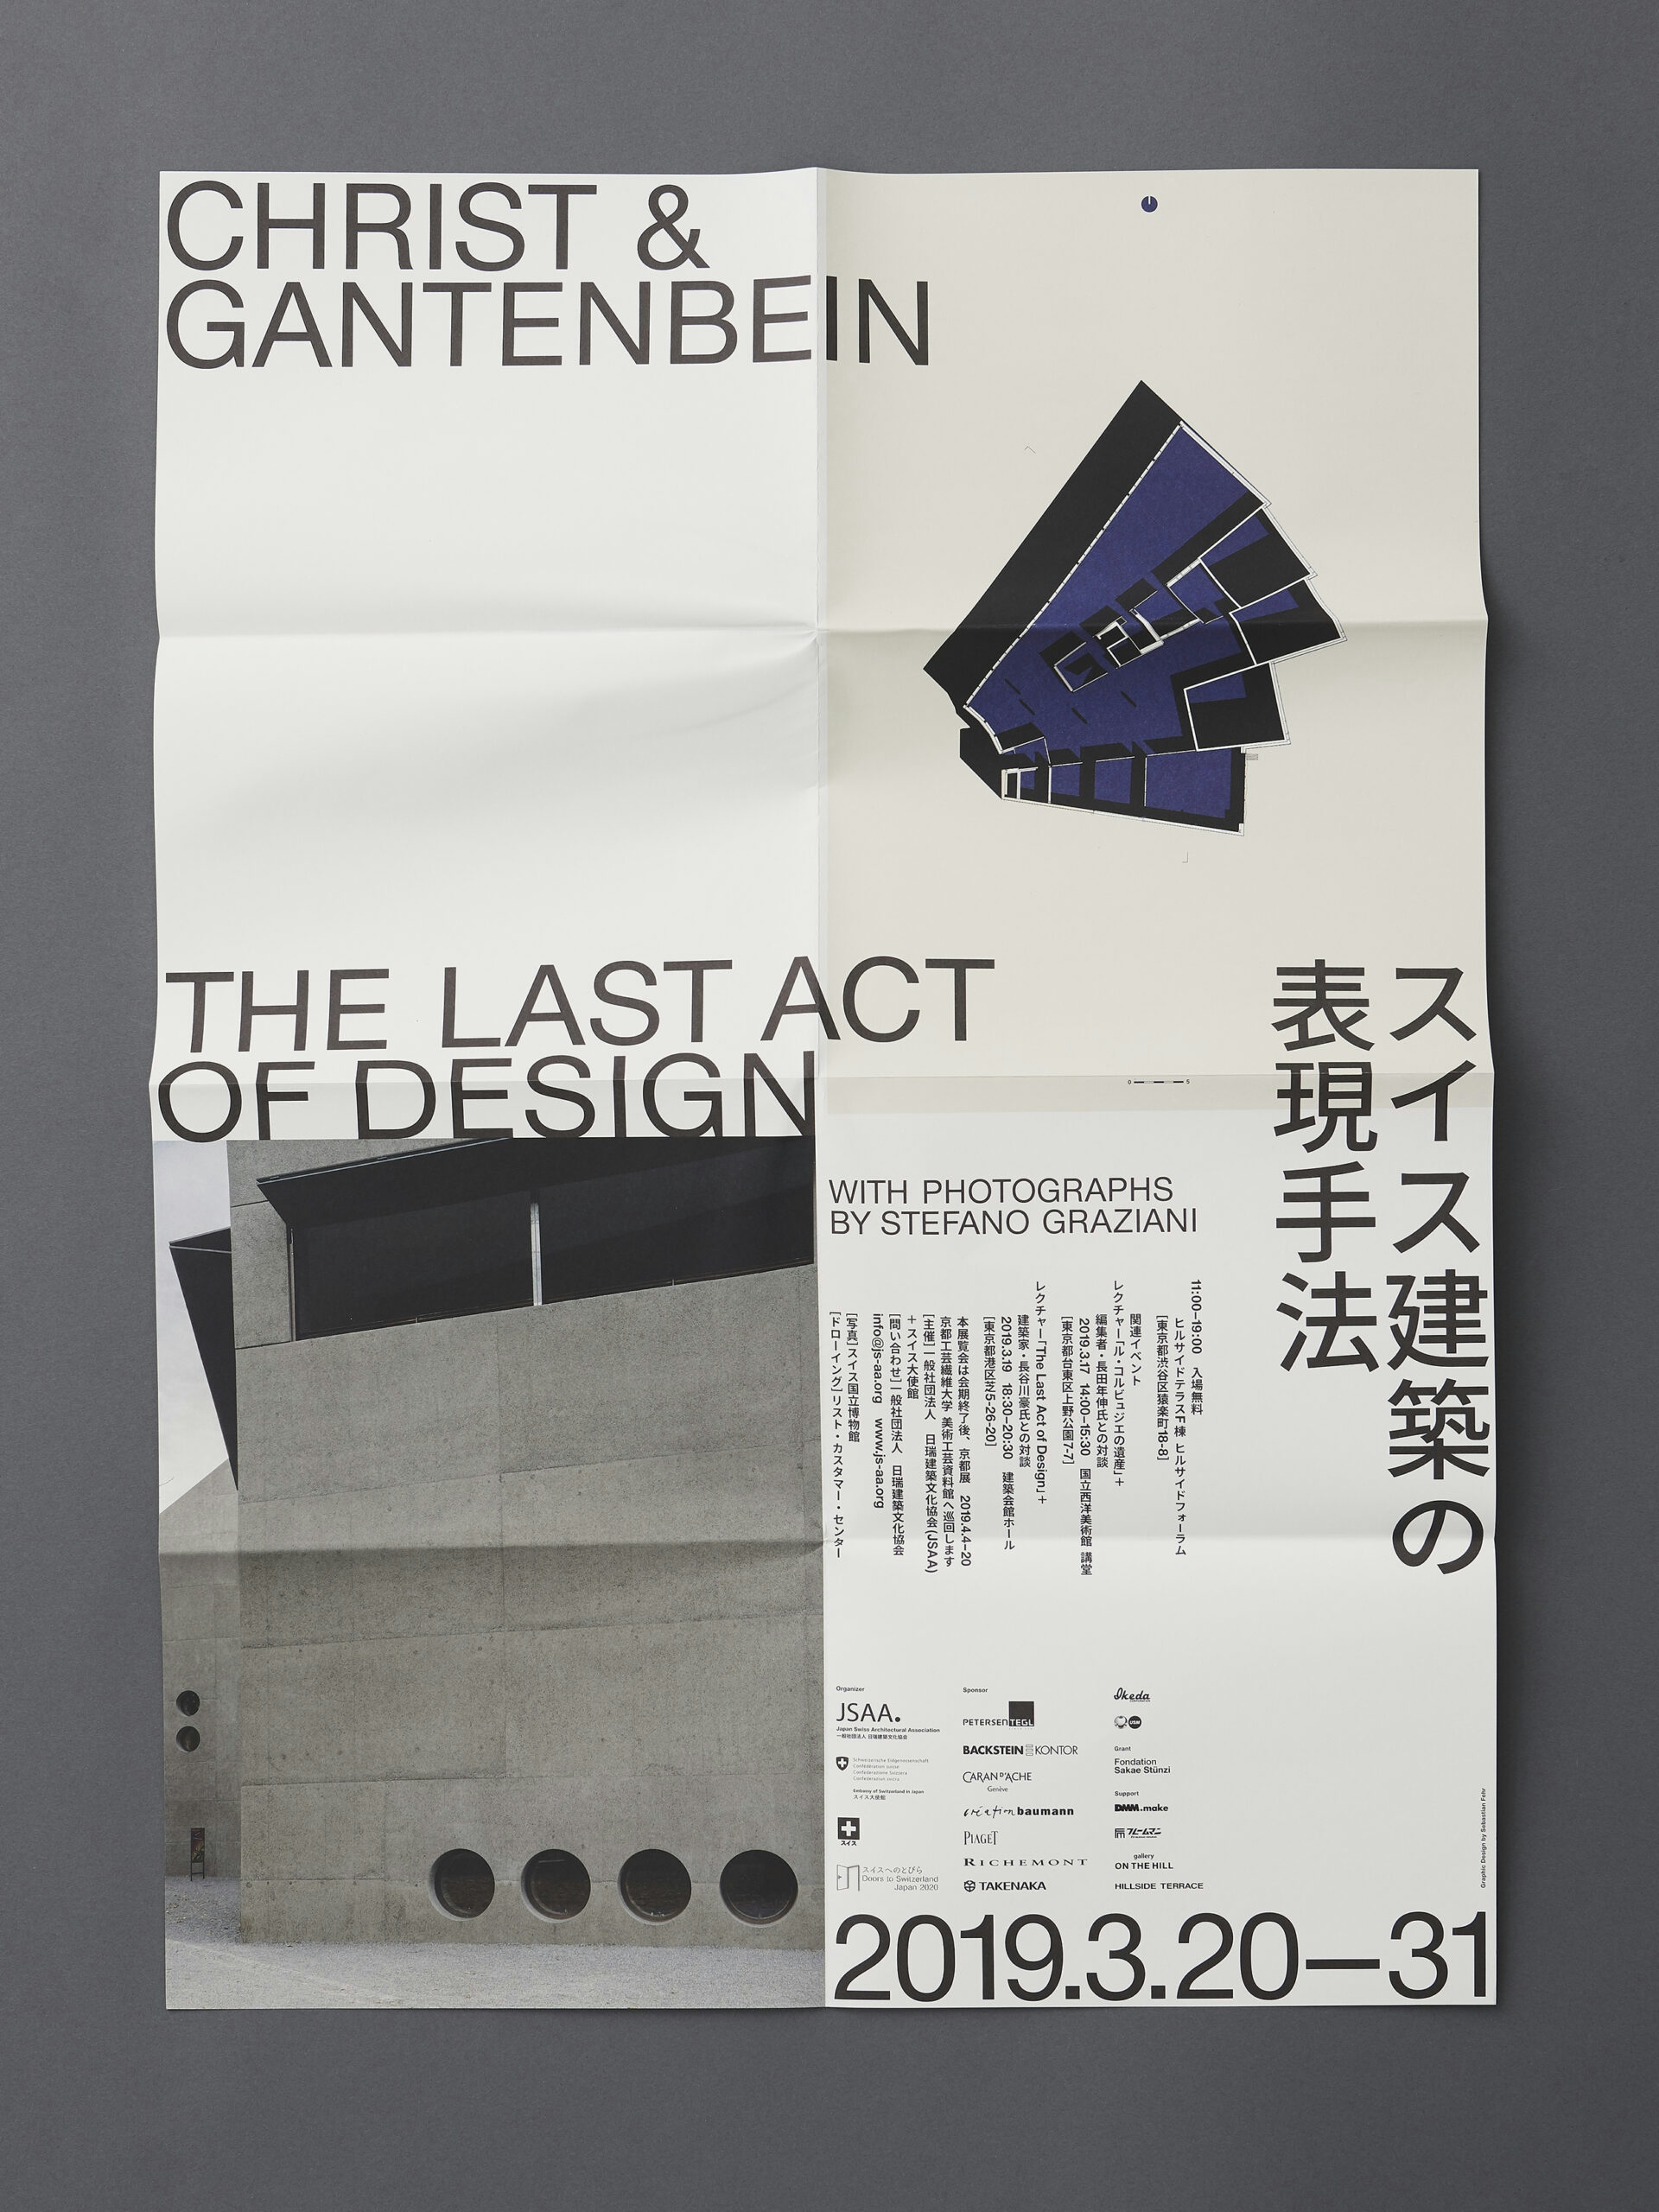 Christ & Gantenbein – The Last Act of Design folded poster front